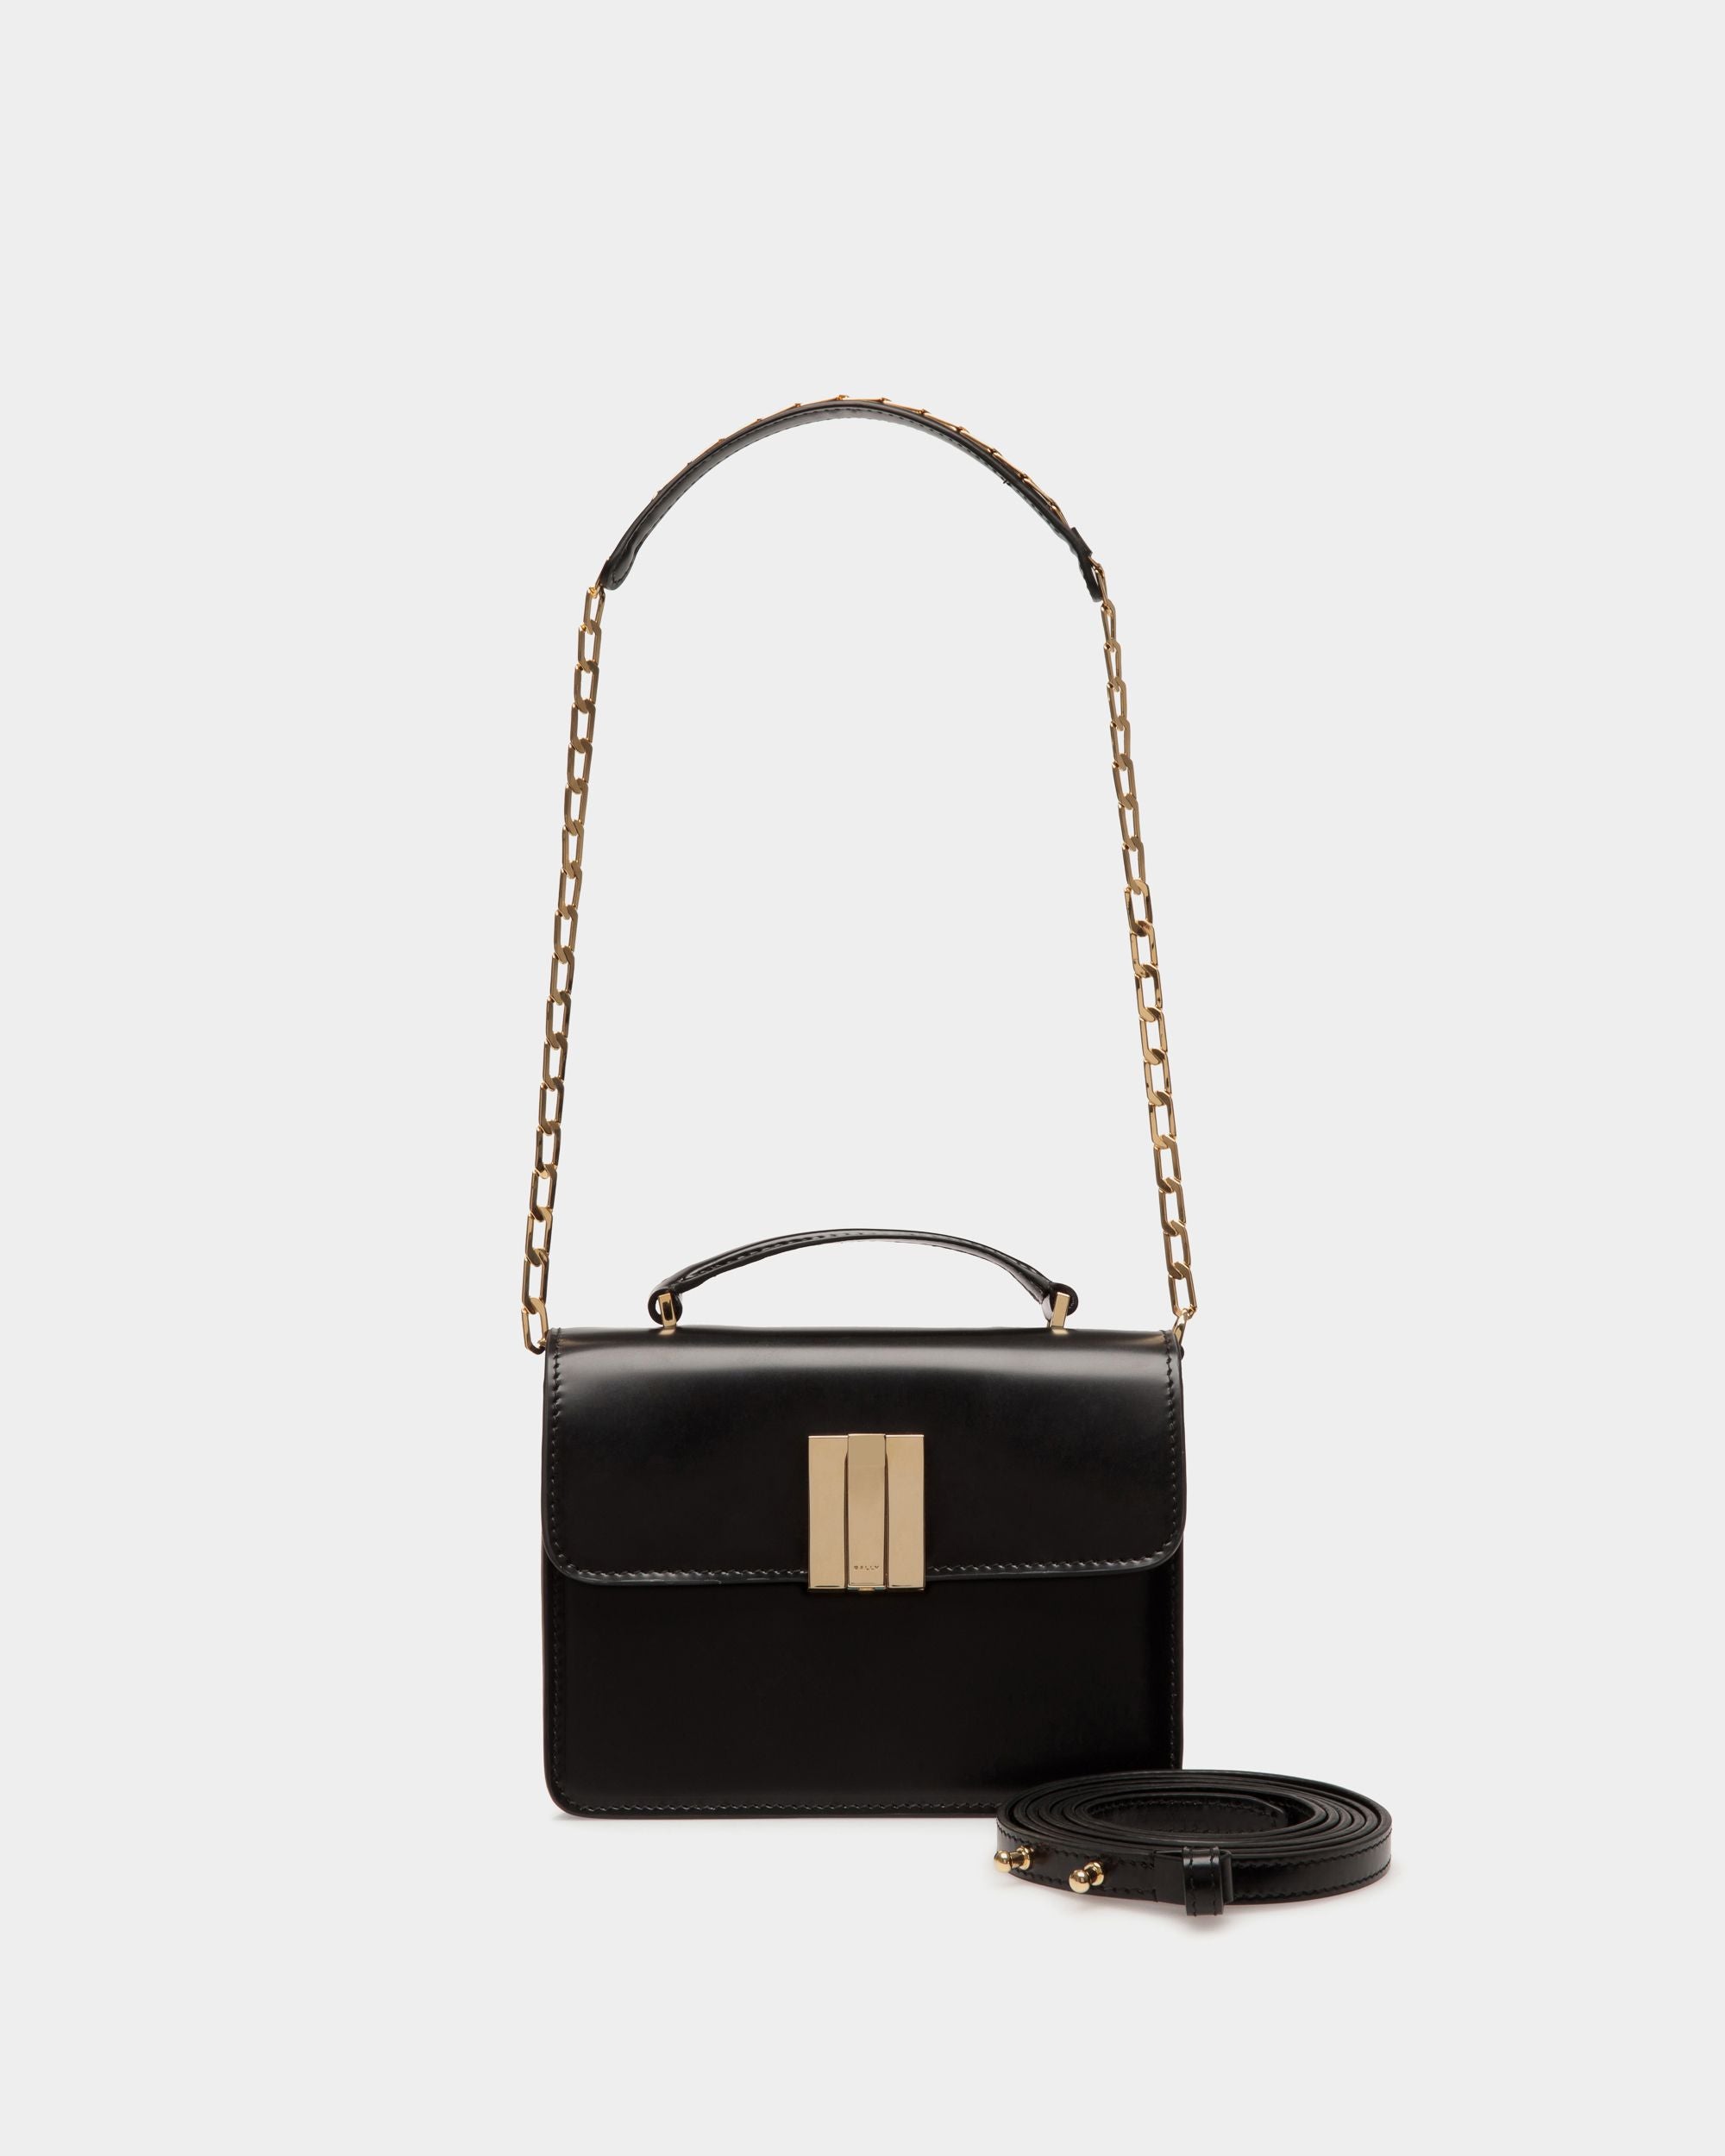 Ollam | Women's Mini Top Handle Bag in Black Brushed Leather | Bally | Still Life Detail